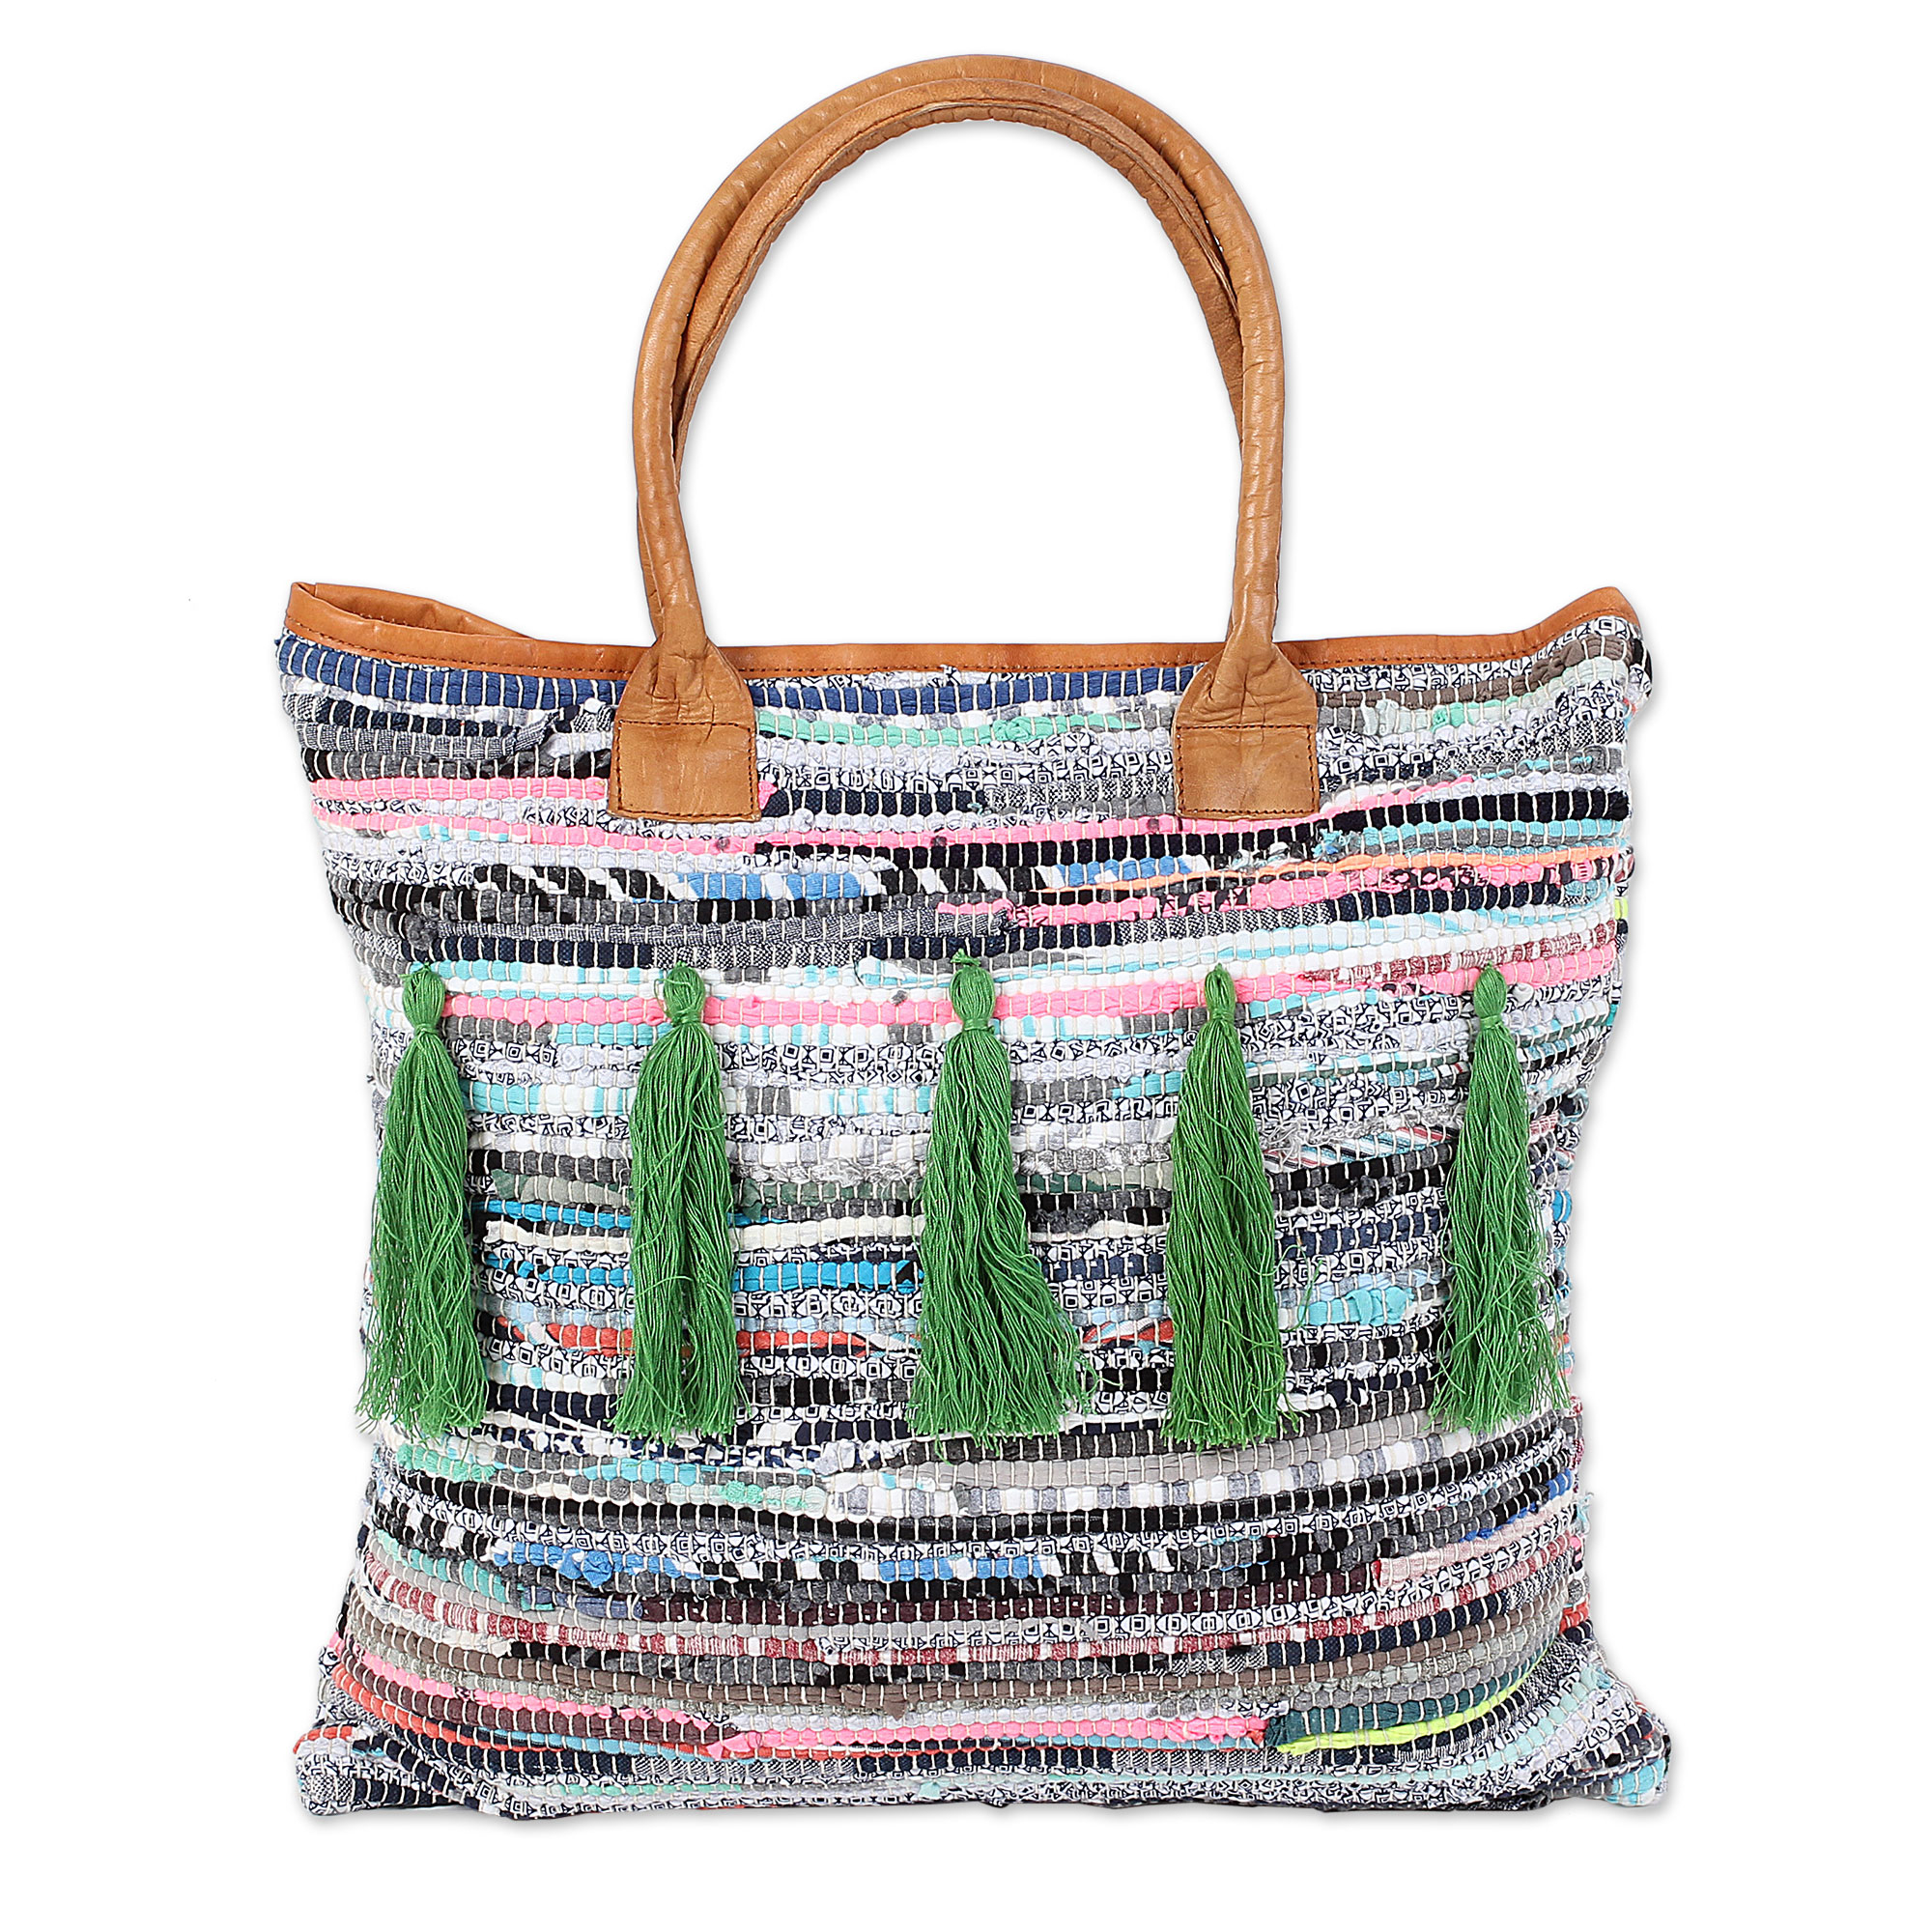 UNICEF Market | Leather Accent Recycled Cotton Tote Handbag from India - Tassel Beauty